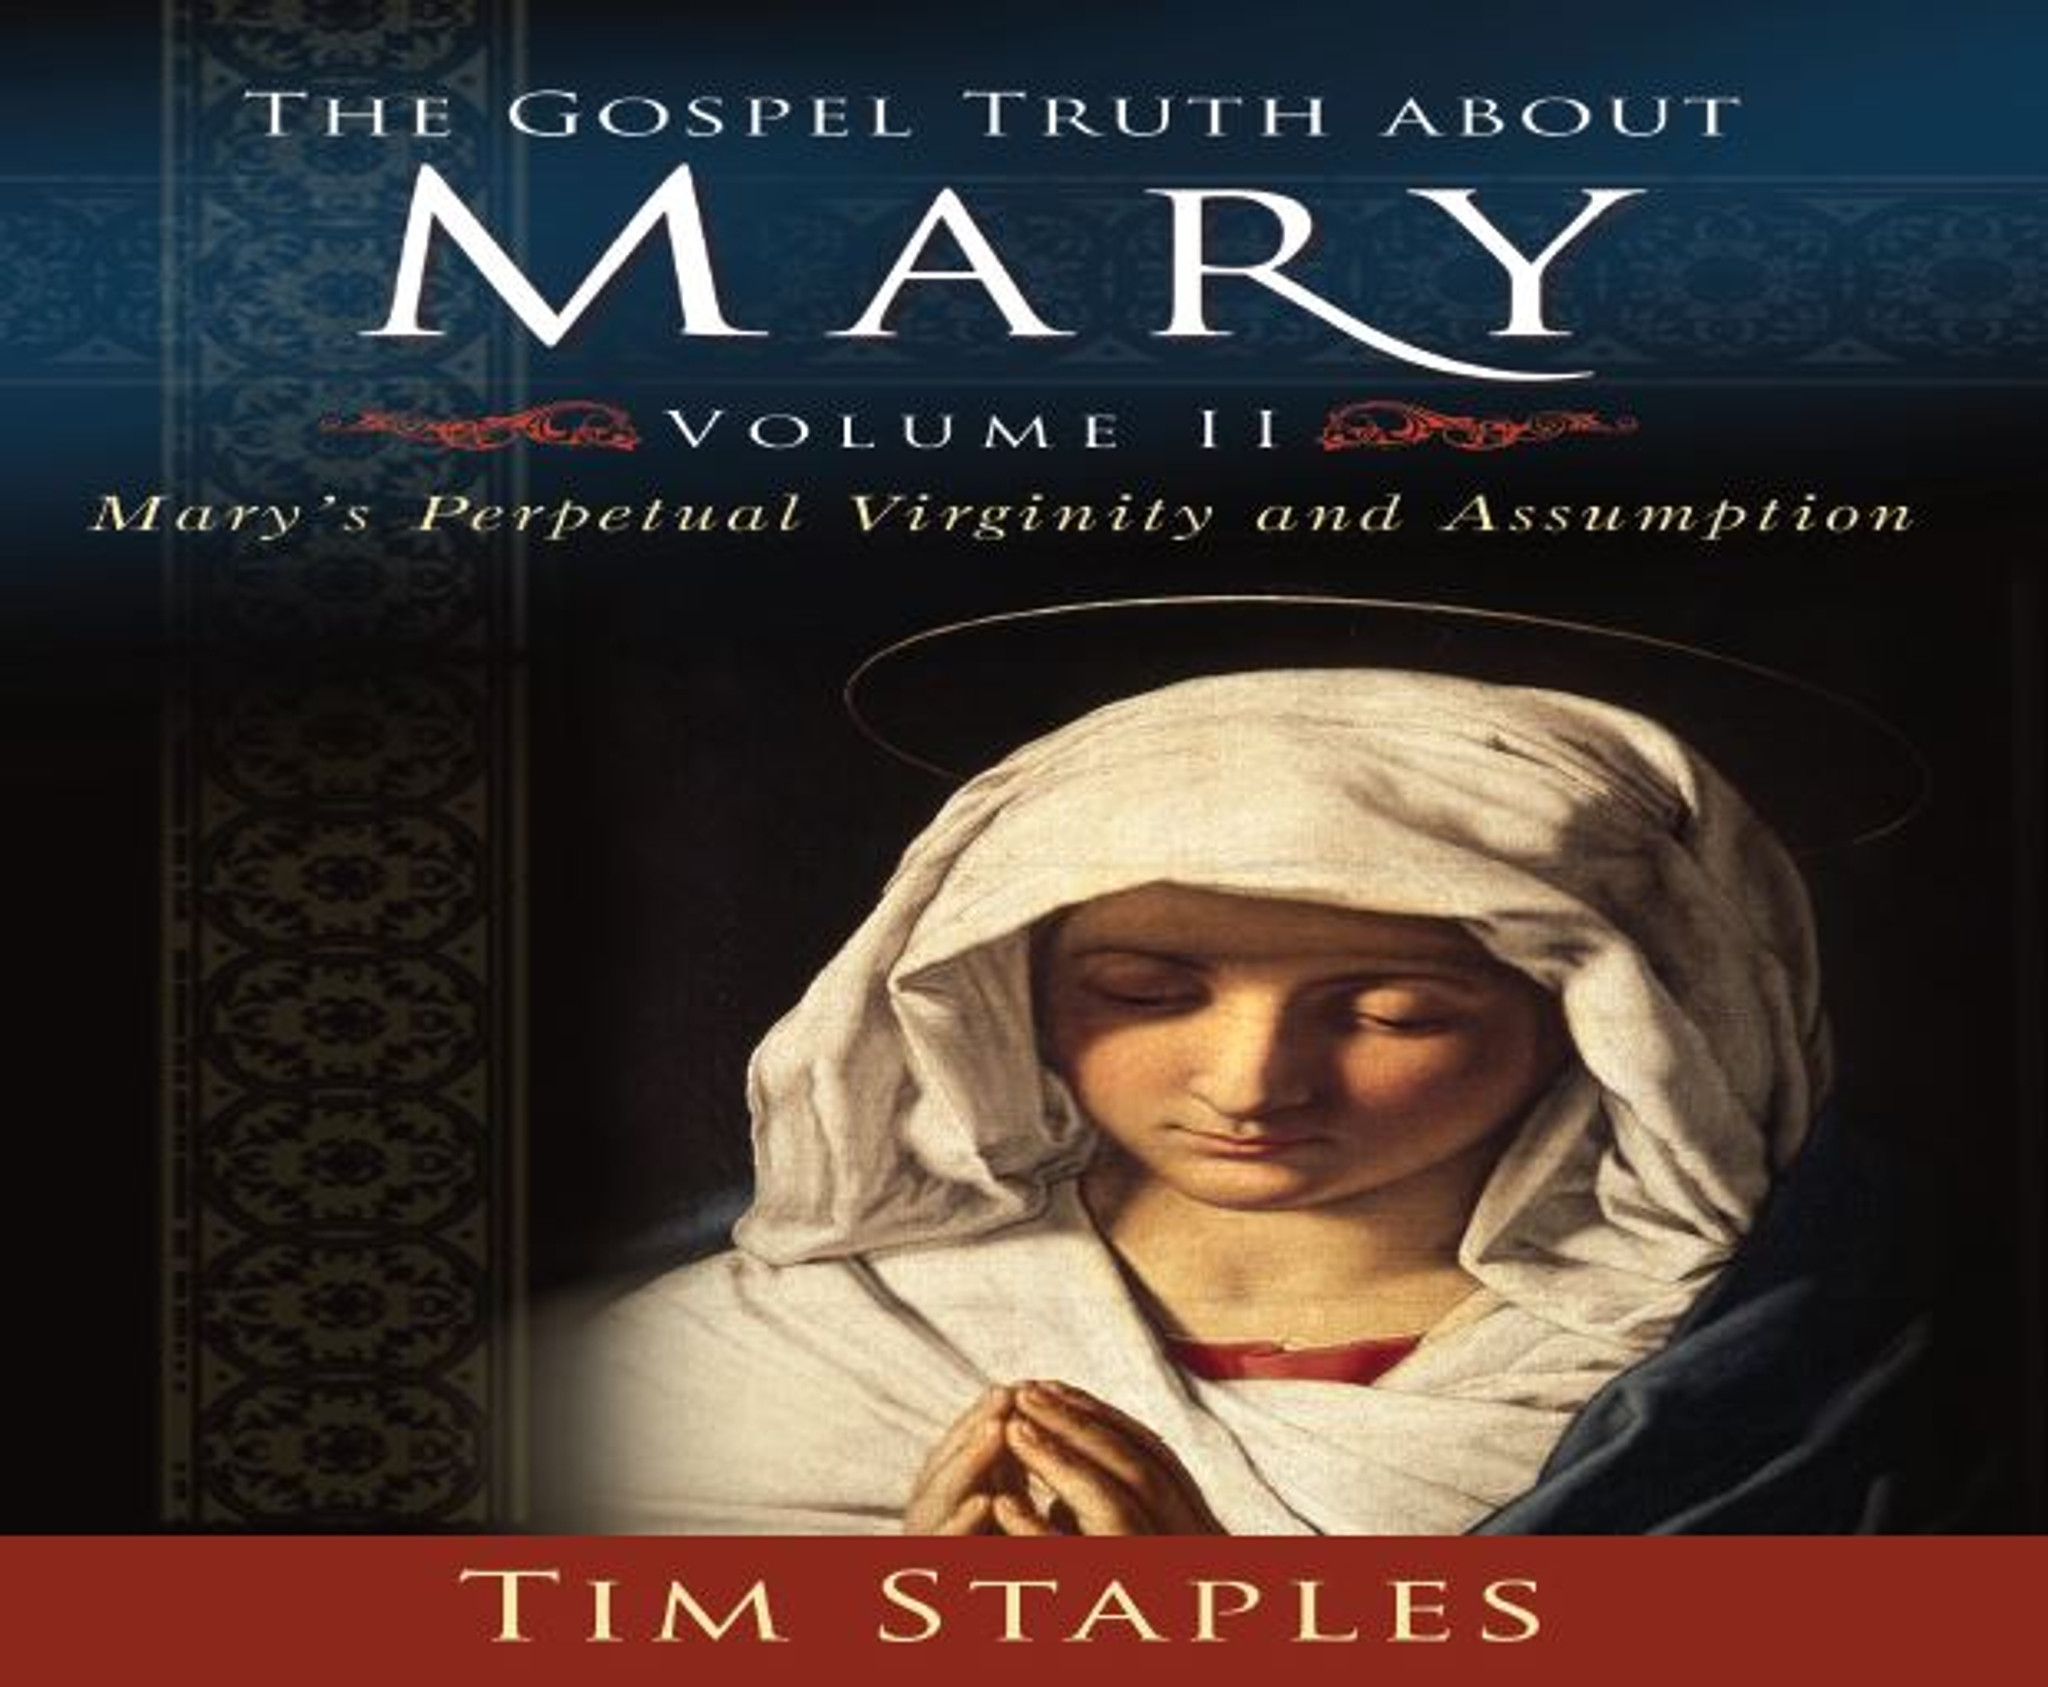 The Gospel Truth About Mary Volume 2 - Tim Staples - Catholic Answers ...